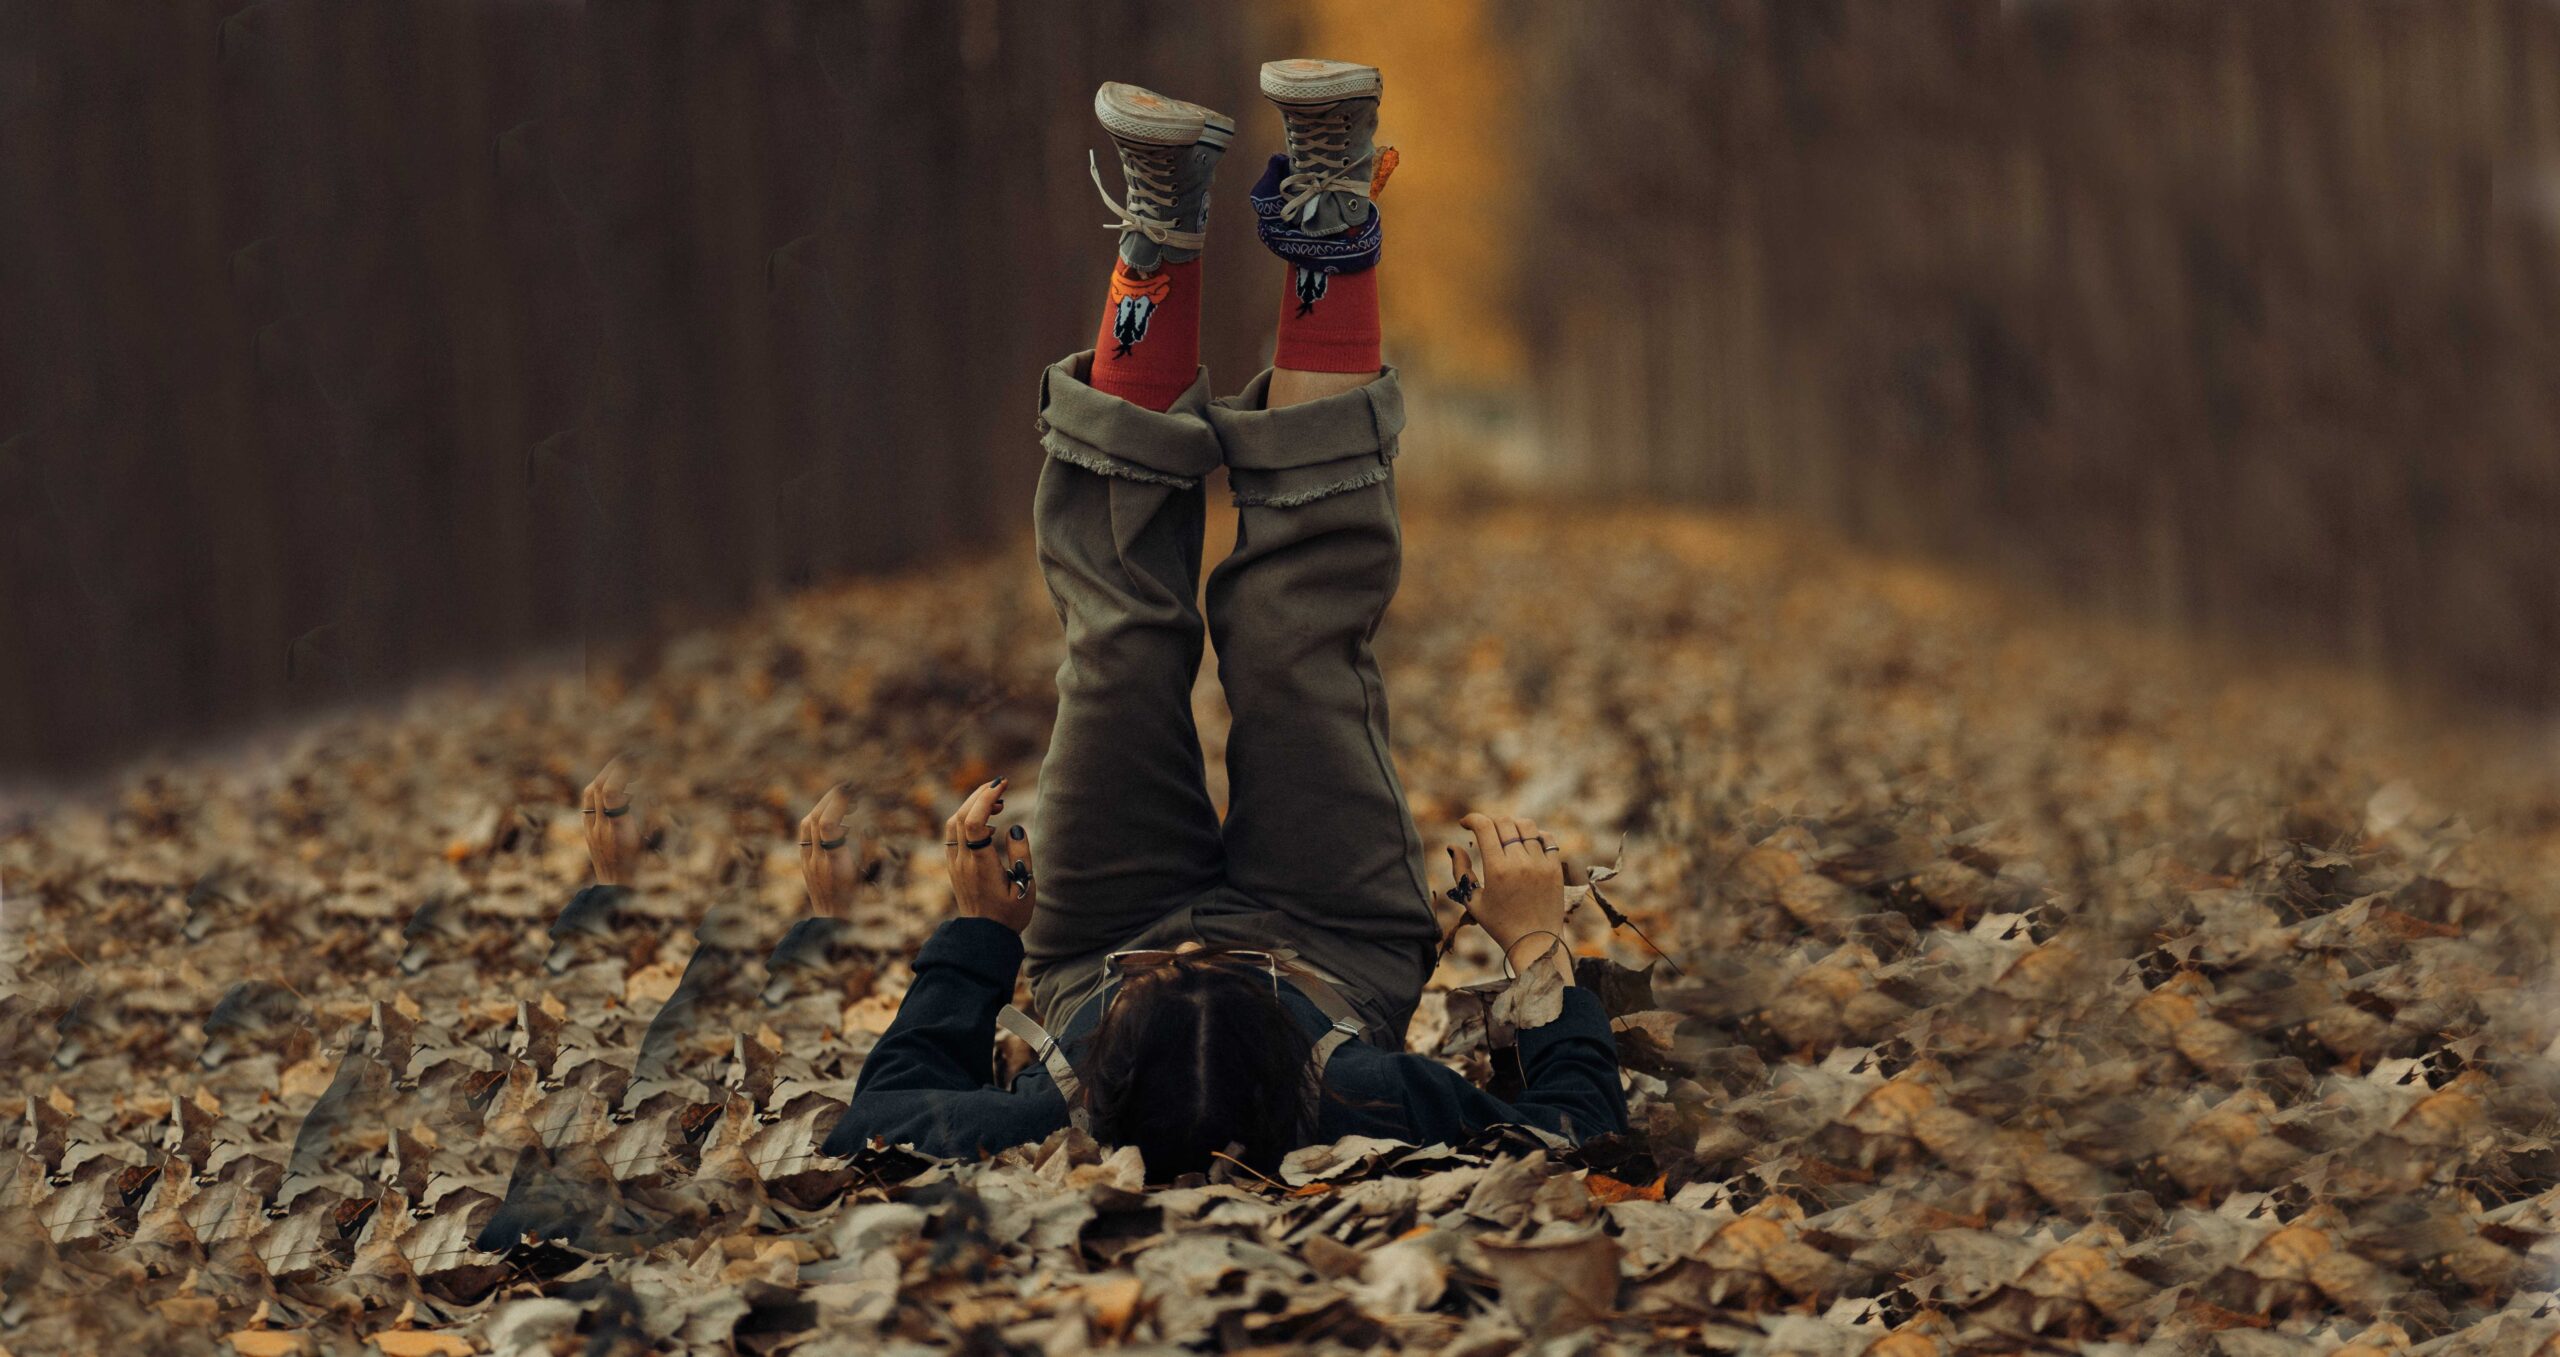 a child lying on autumn leaves, legs straight up, vertically